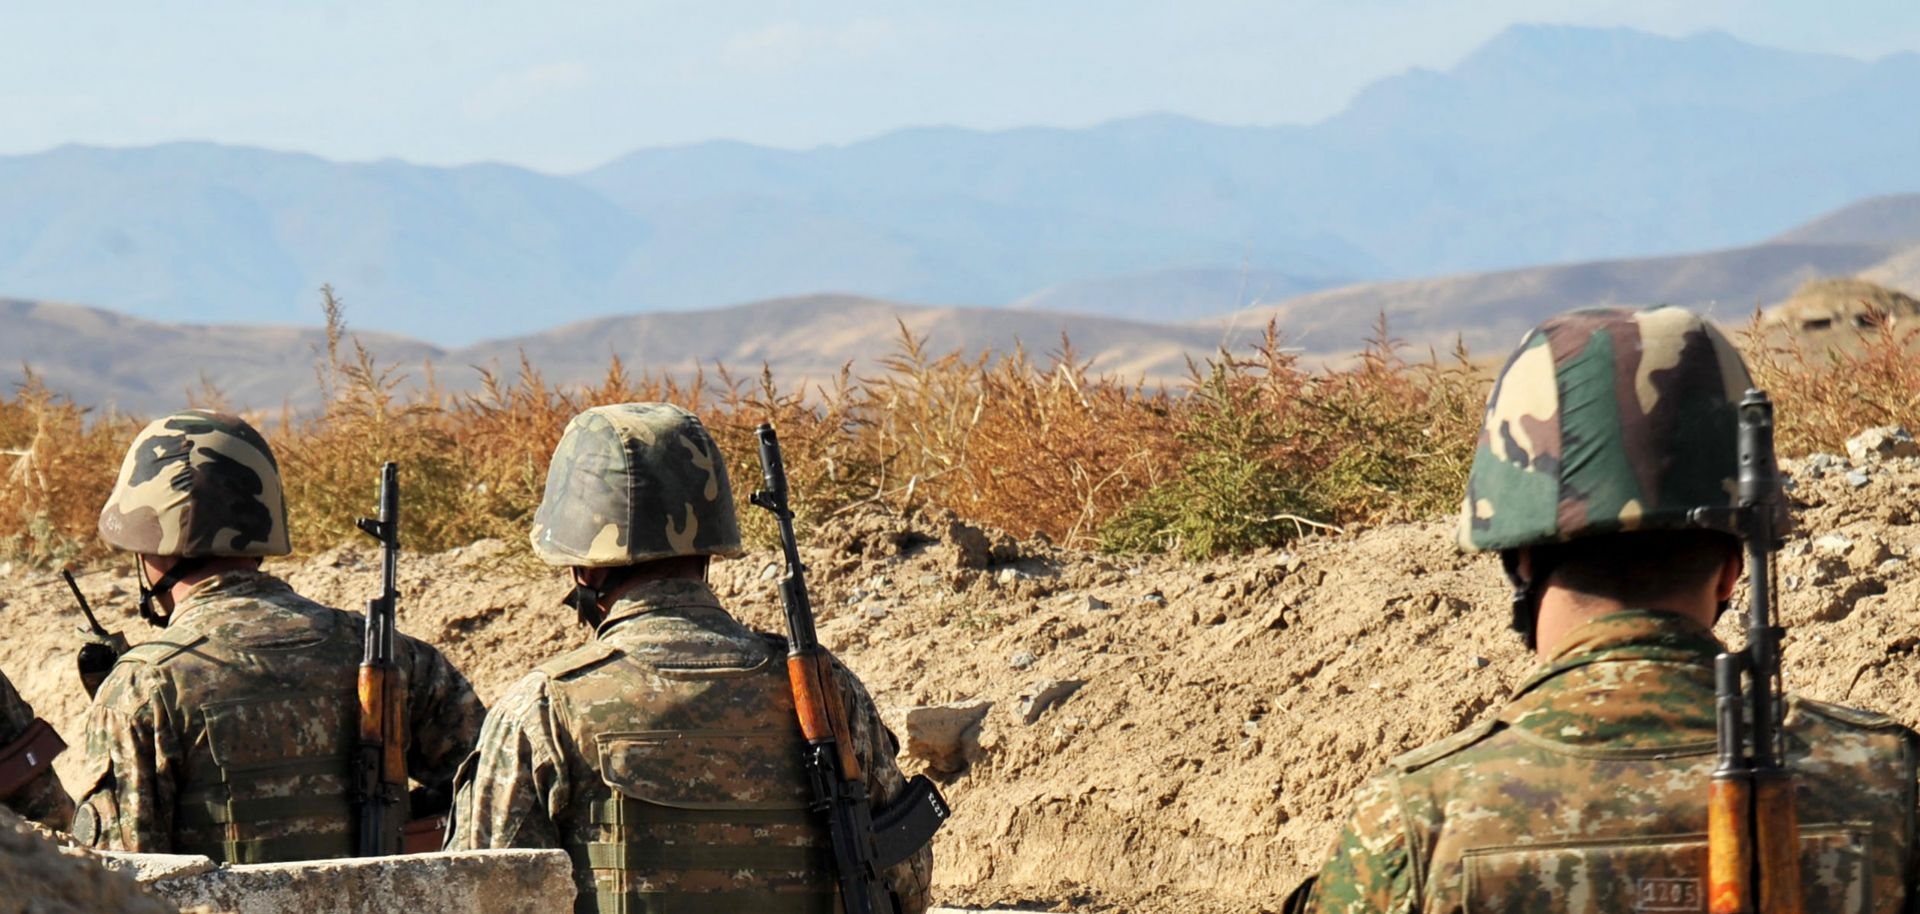 Soldiers from the breakaway territory of Nagorno-Karabakh near the Azerbaijan border in 2012. Conflict over the territory flared again over the weekend.